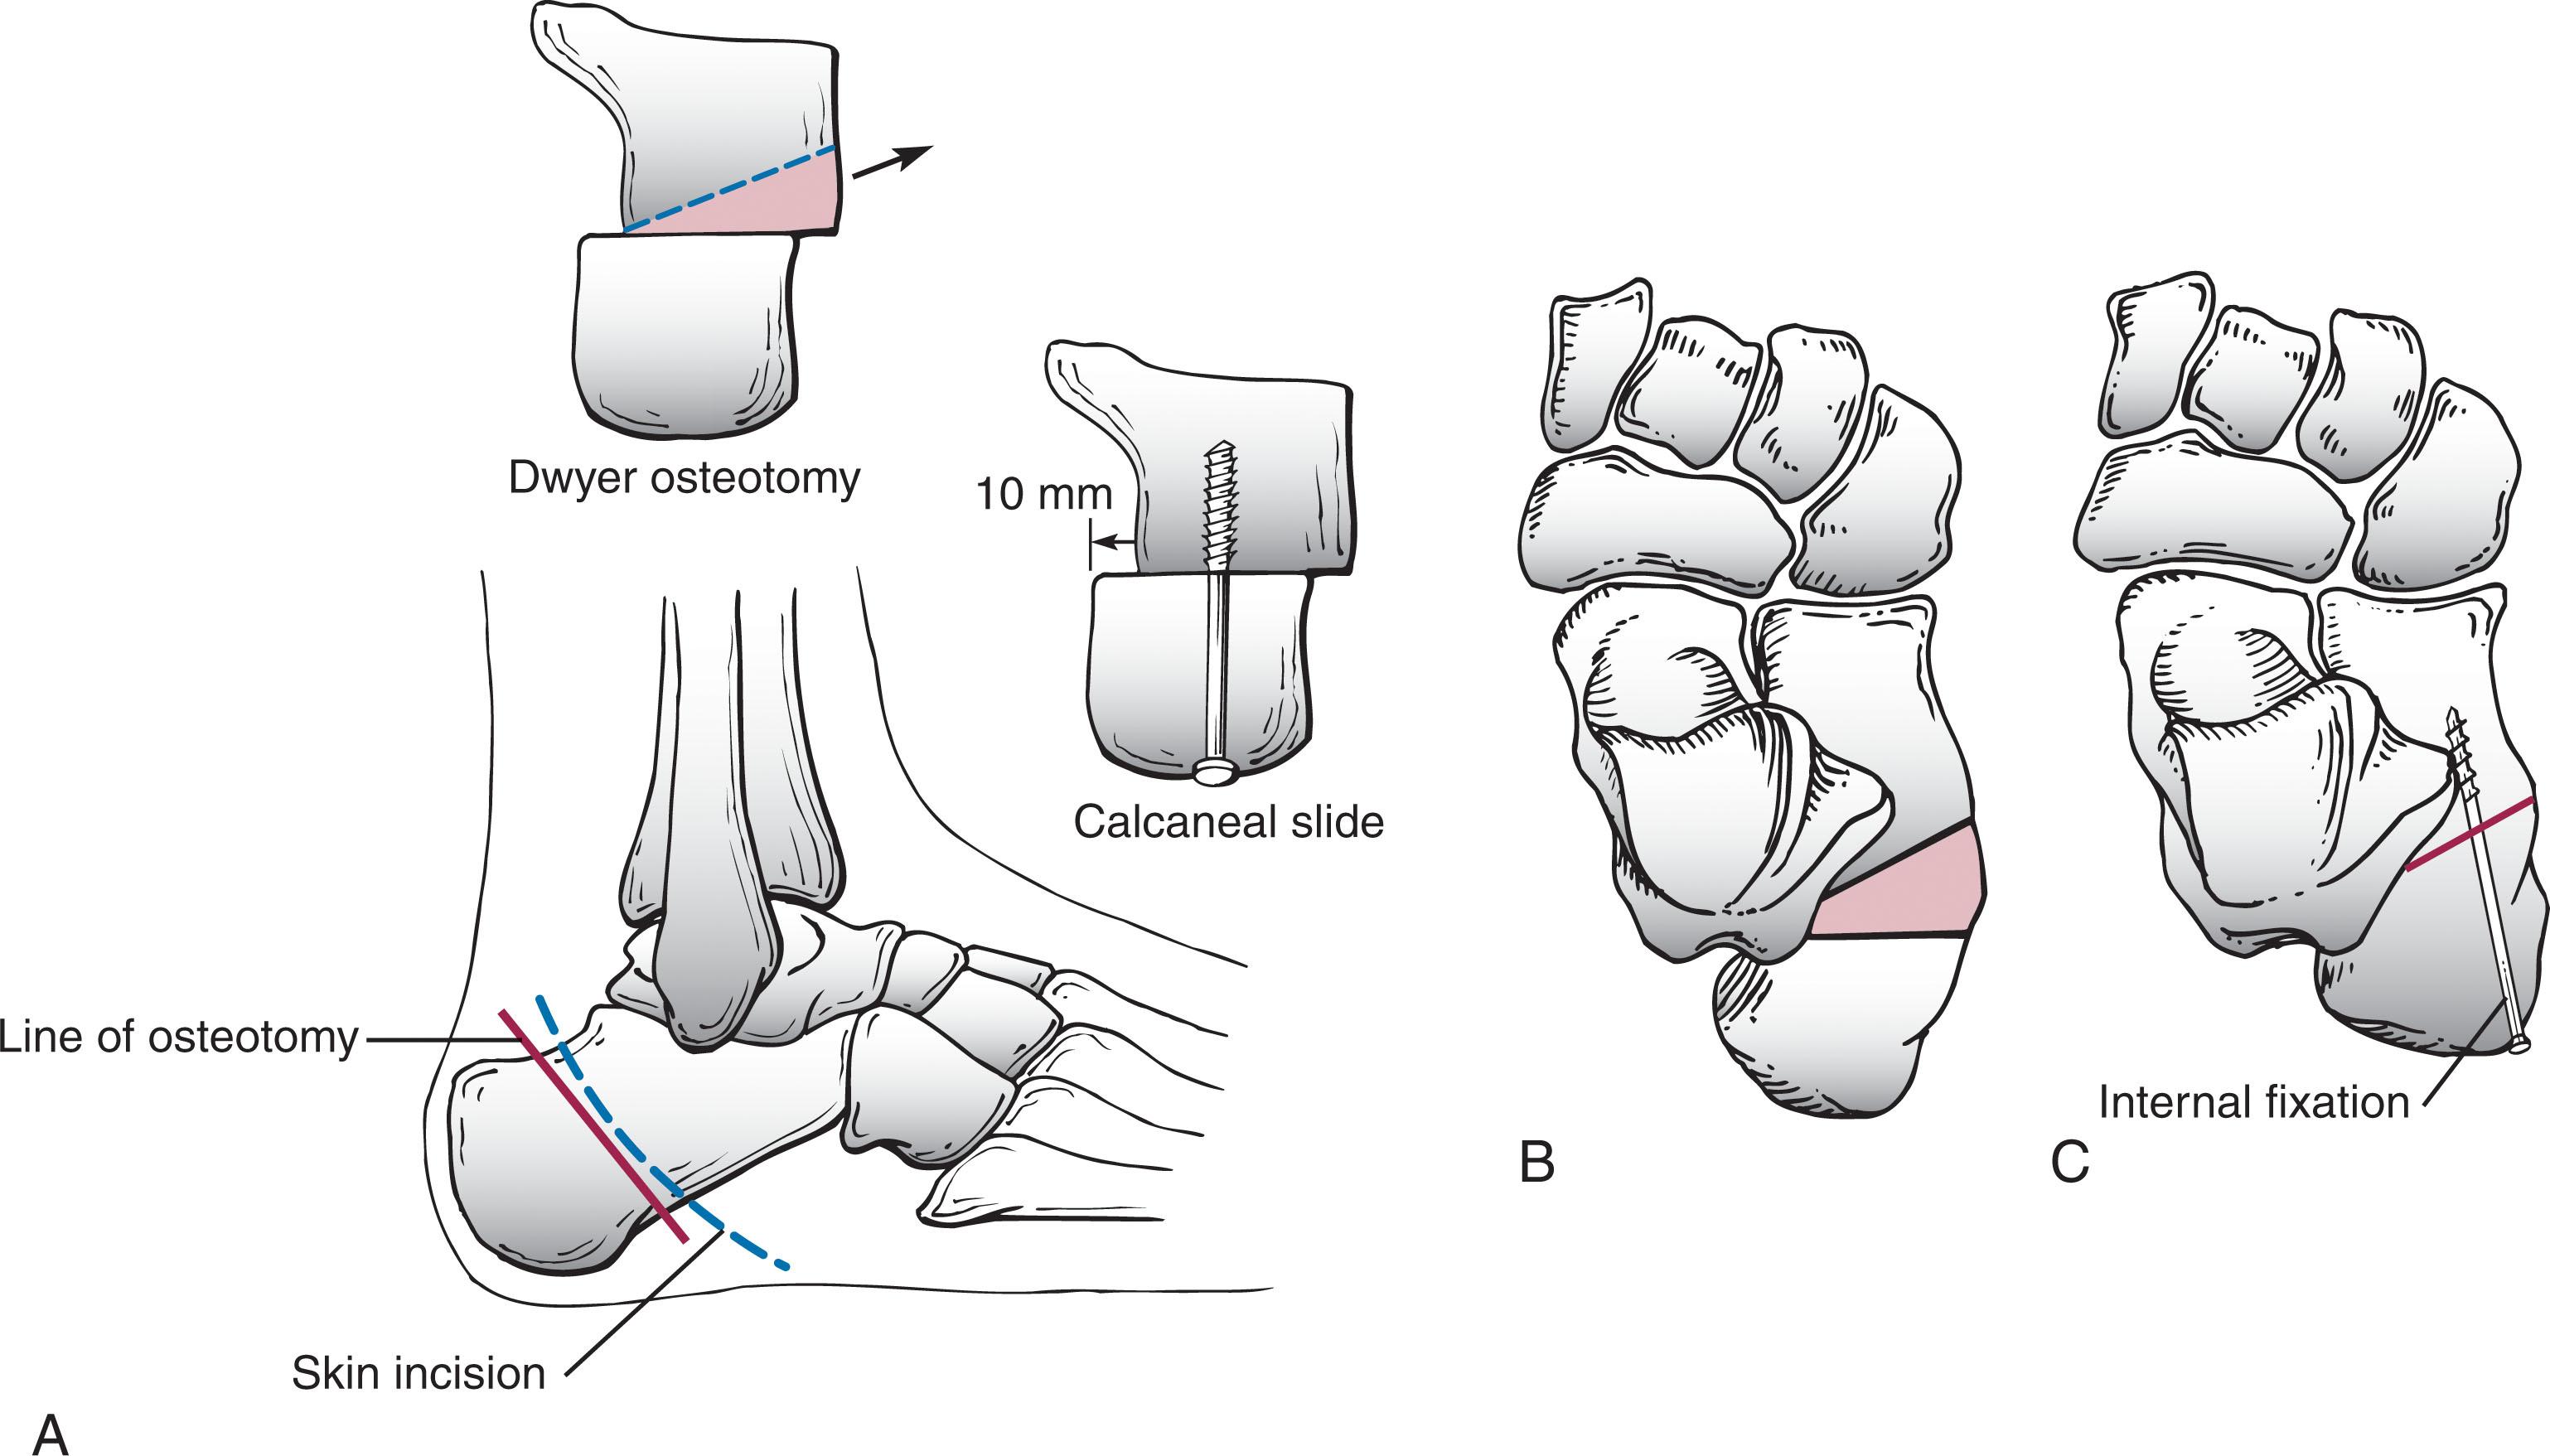 Fig. 19-10, Dwyer calcaneal osteotomy. A , Skin incision is made halfway between the palpable Achilles tendon and the peroneal tendons, after the sweep of the peroneal tendons. The sural nerve must be identified and protected. B , Two oblique osteotomies are carried out as closing-wedge procedures. The base of the closing wedge increases to correct the increasing varus deformity. C , The wedge is removed, the osteotomy site is closed, and internal fixation is accomplished.